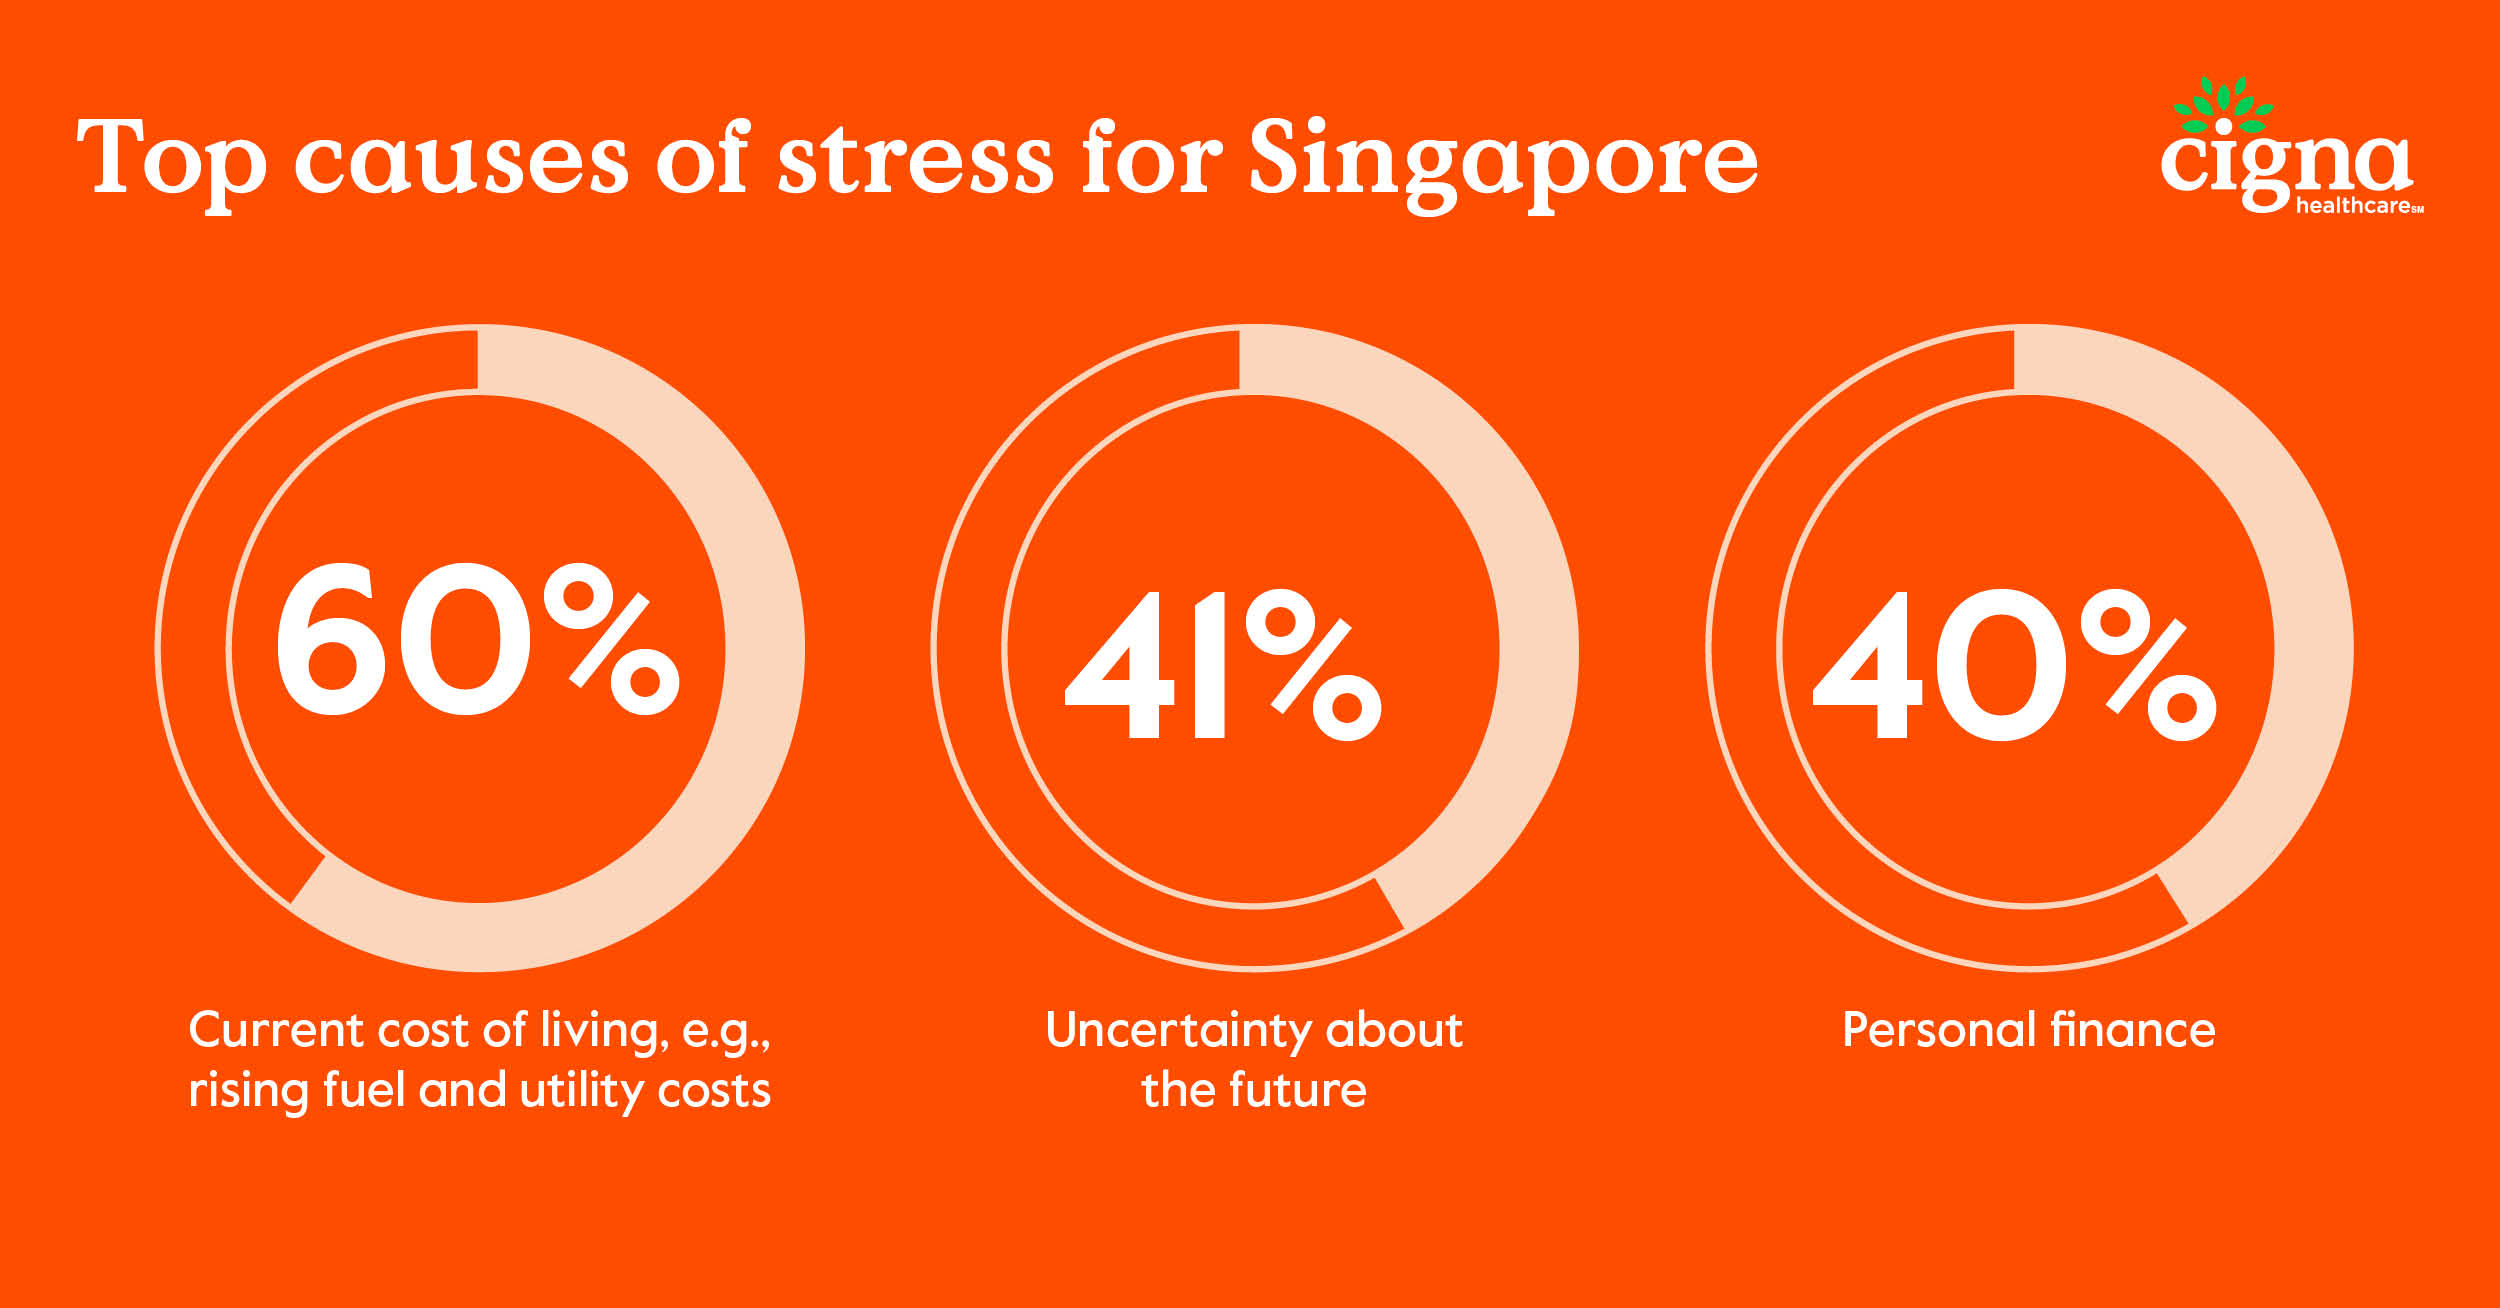 Top causes of stress in Singapore